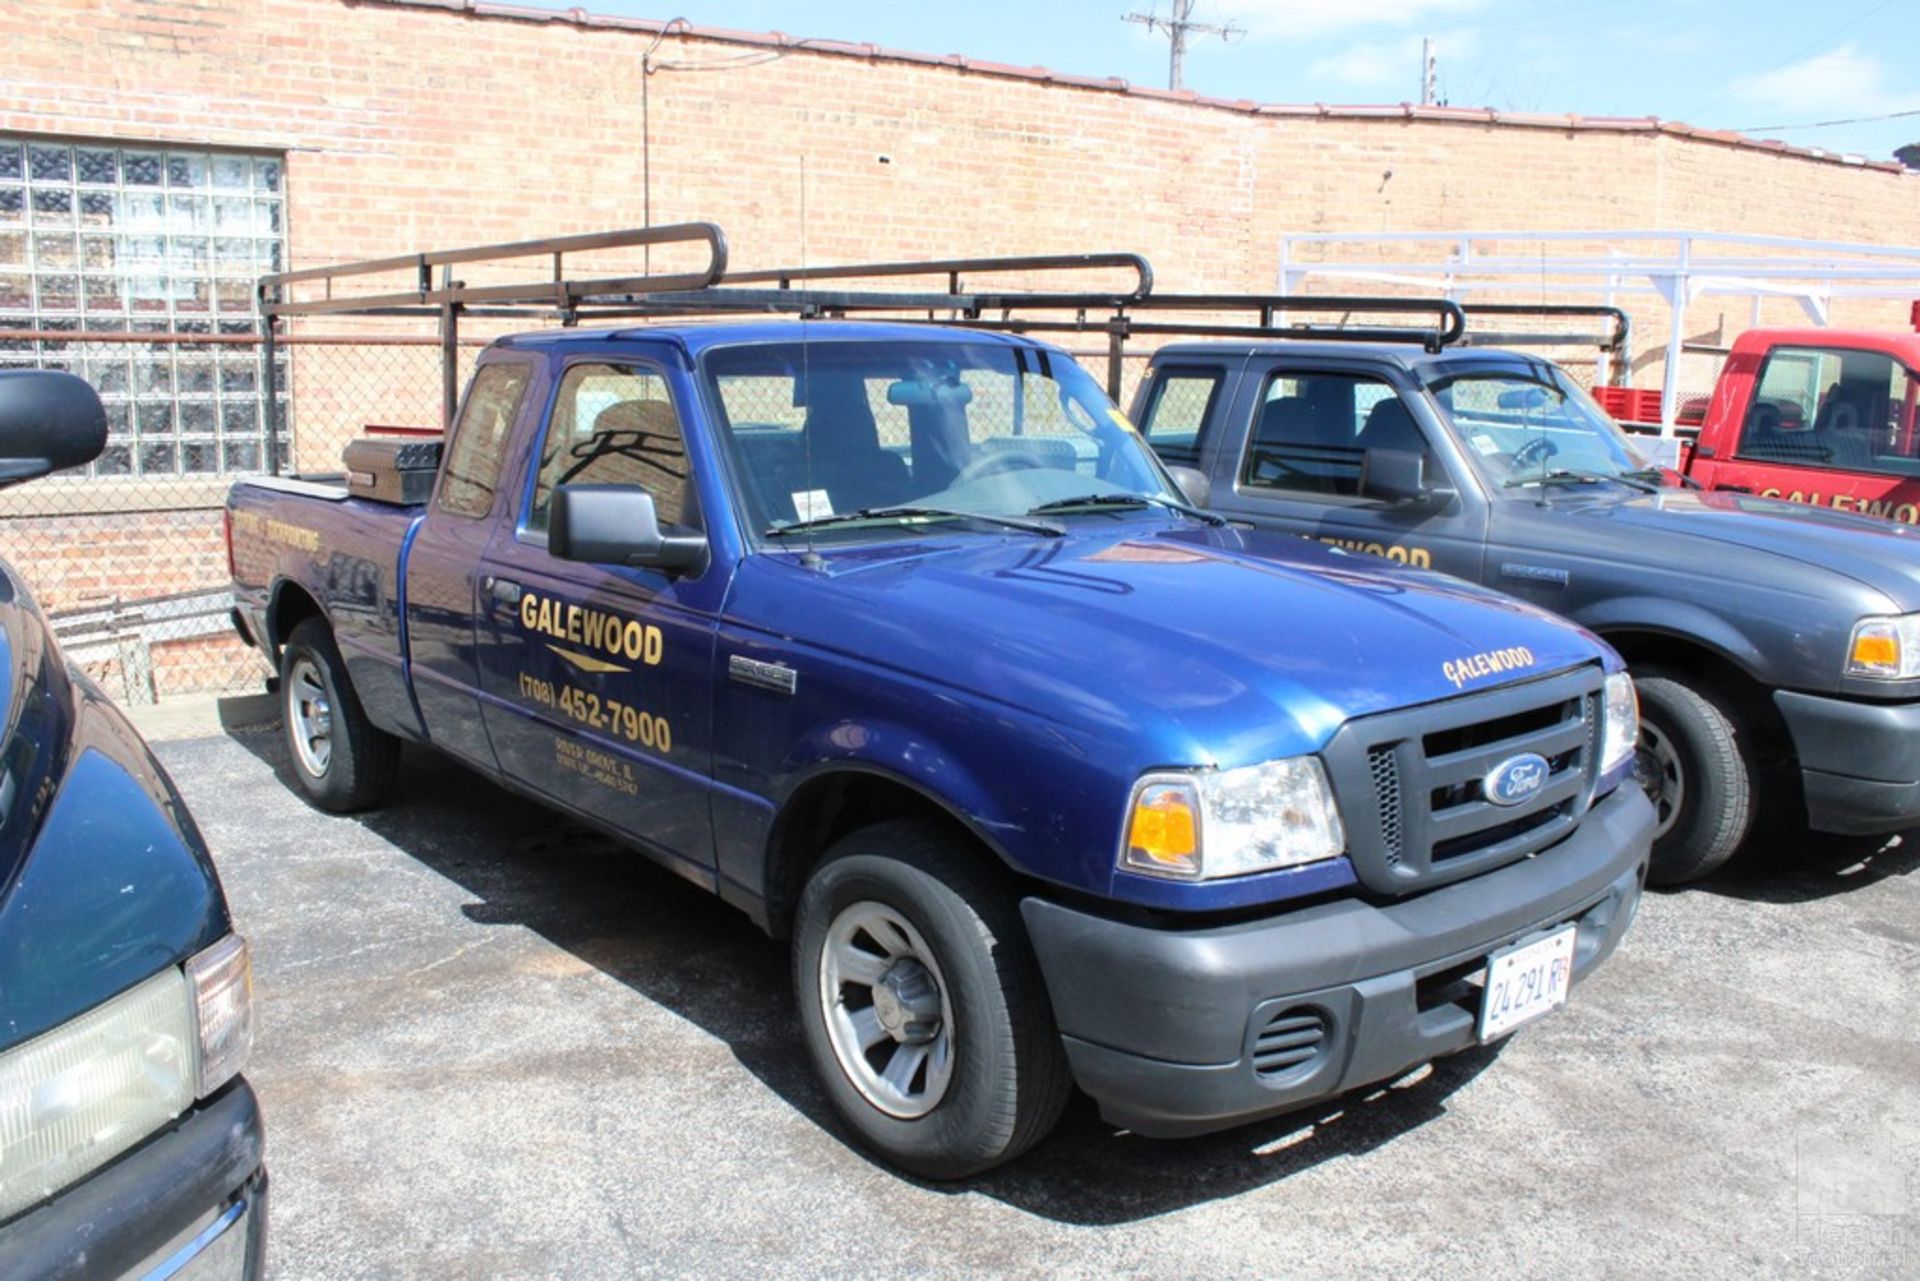 2008 FORD MODEL RANGER SUPER CAB PICK UP TRUCK, VIN: 1FTYR14DX8PA31416, AUTOMATIC TRANSMISSION, - Image 2 of 8